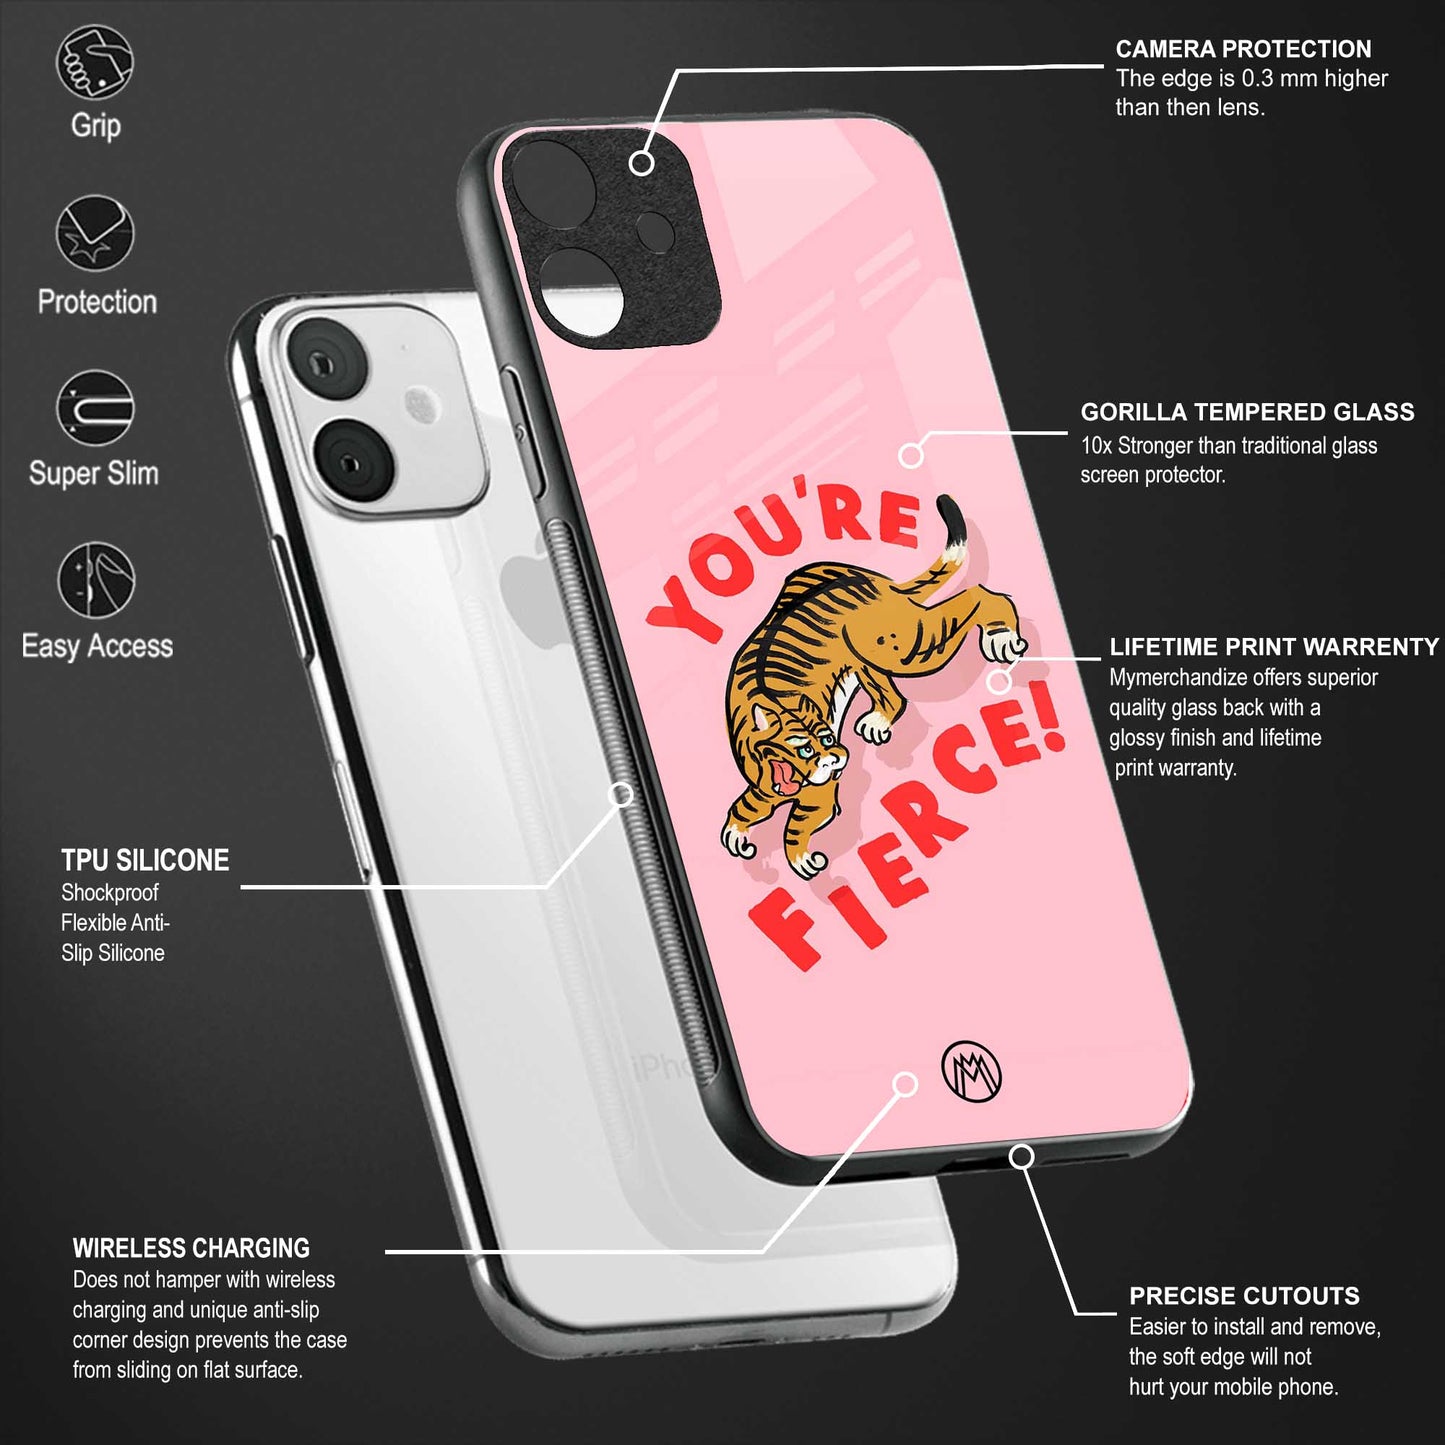 you're fierce back phone cover | glass case for samsun galaxy a24 4g